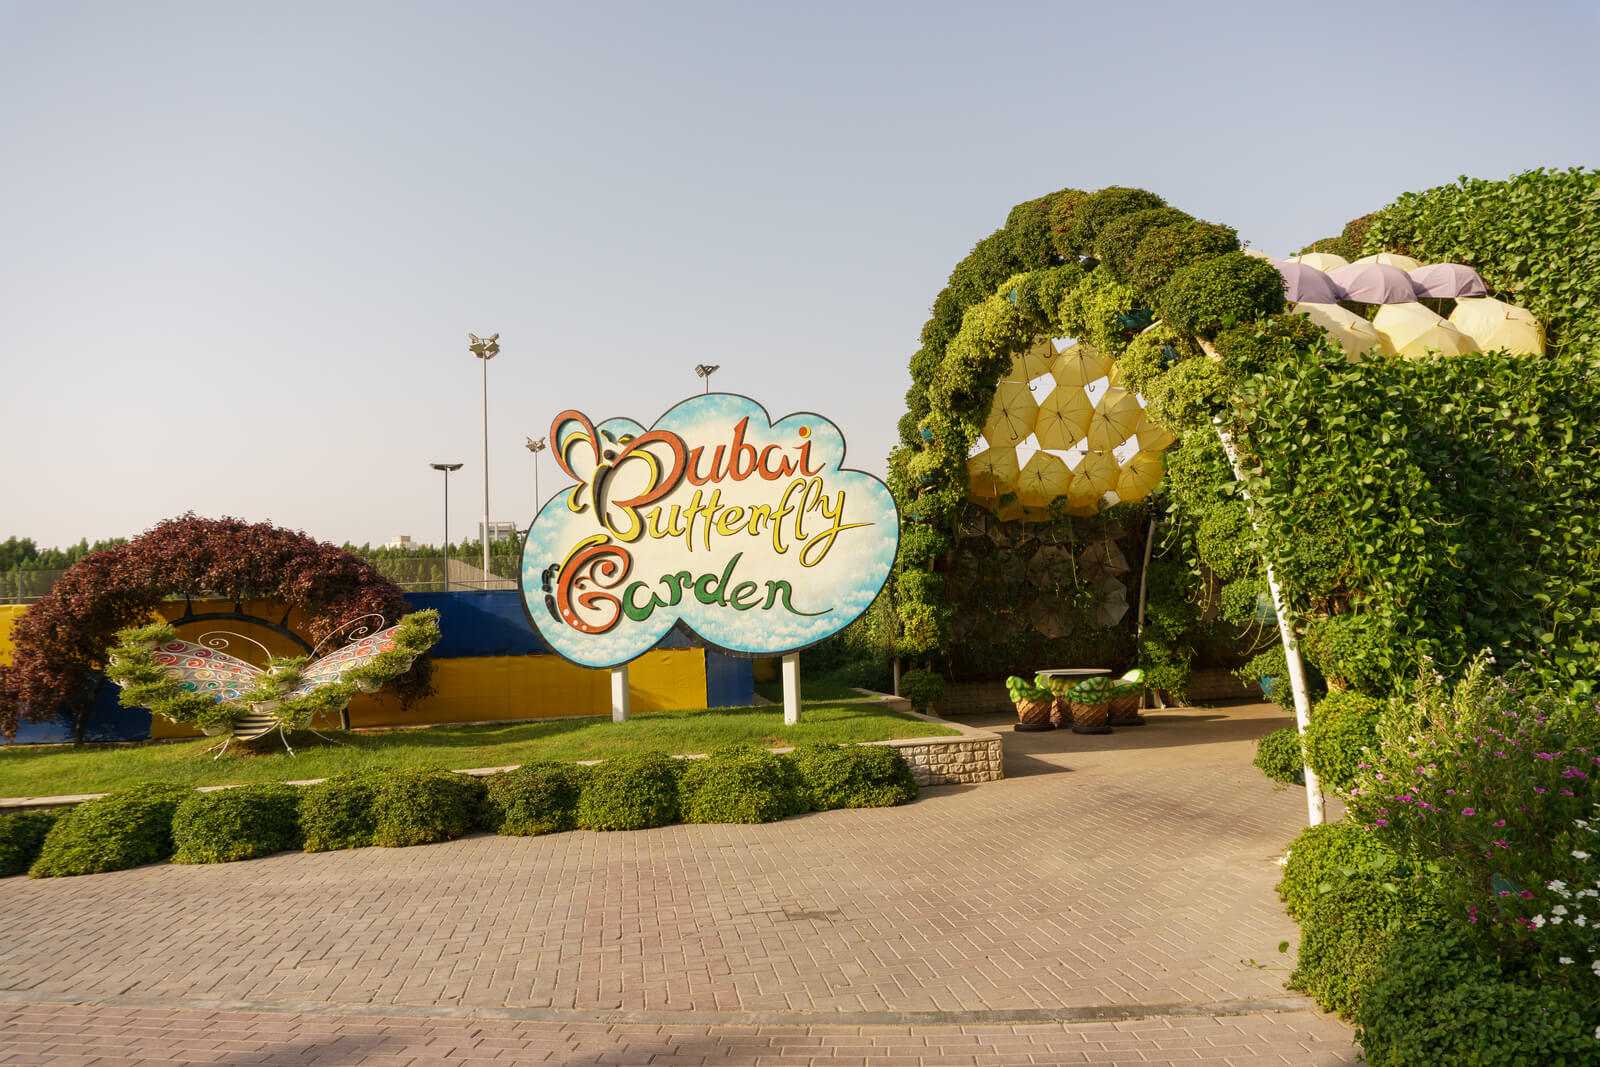 Dubai Butterfly Garden Tickets price and how to skip the lines?